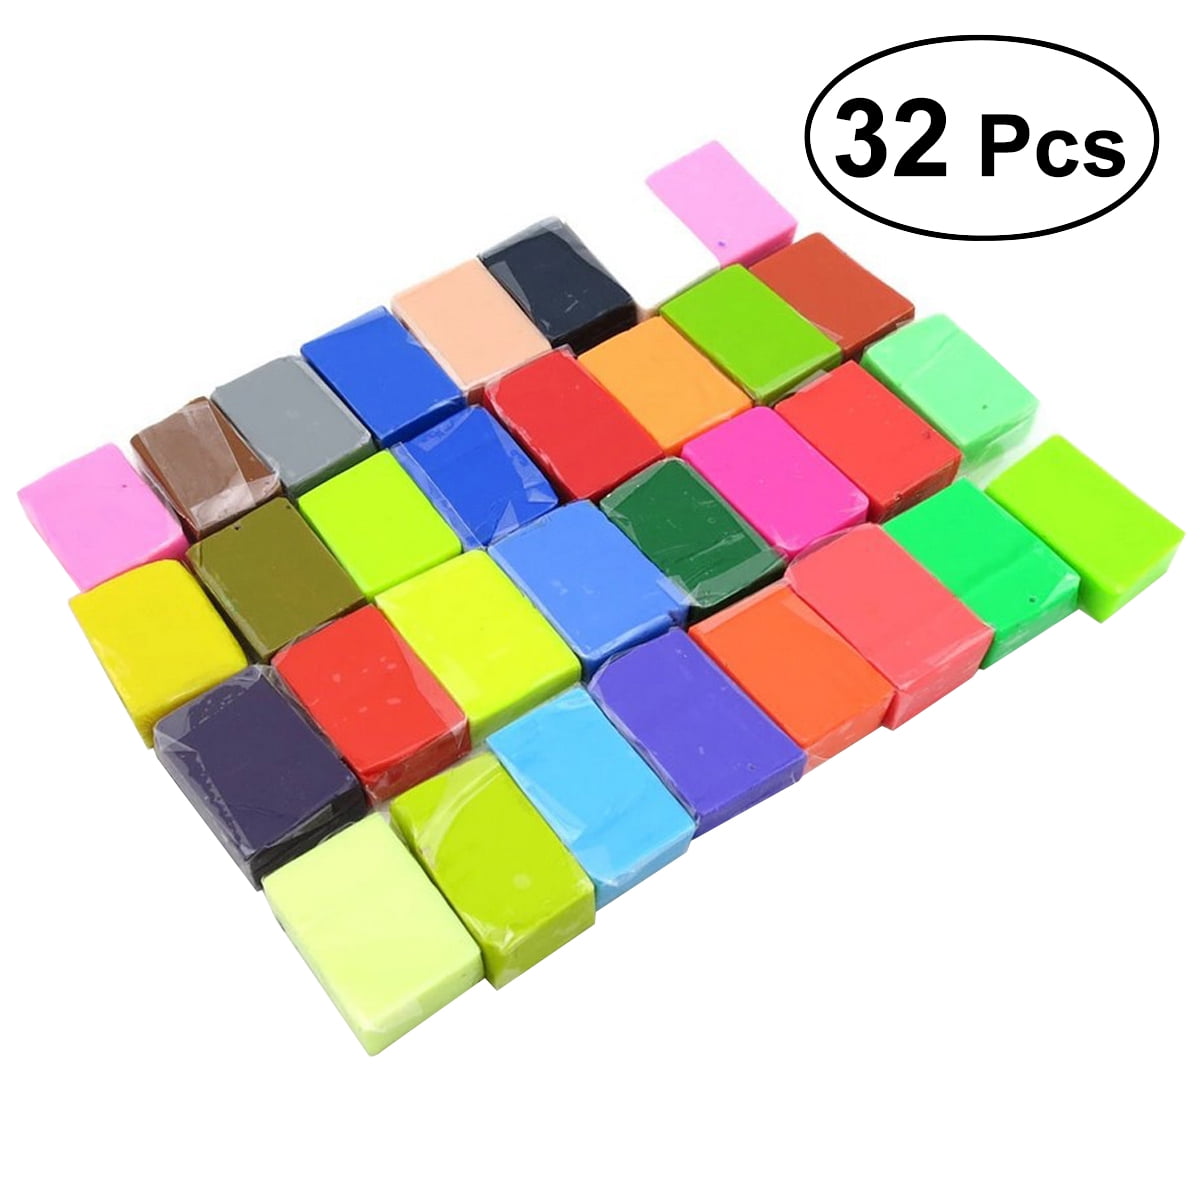 FIMO 32pcs Mixed Color Oven Bake Fimo Polymer Soft Clay Moulding Toys for Children 